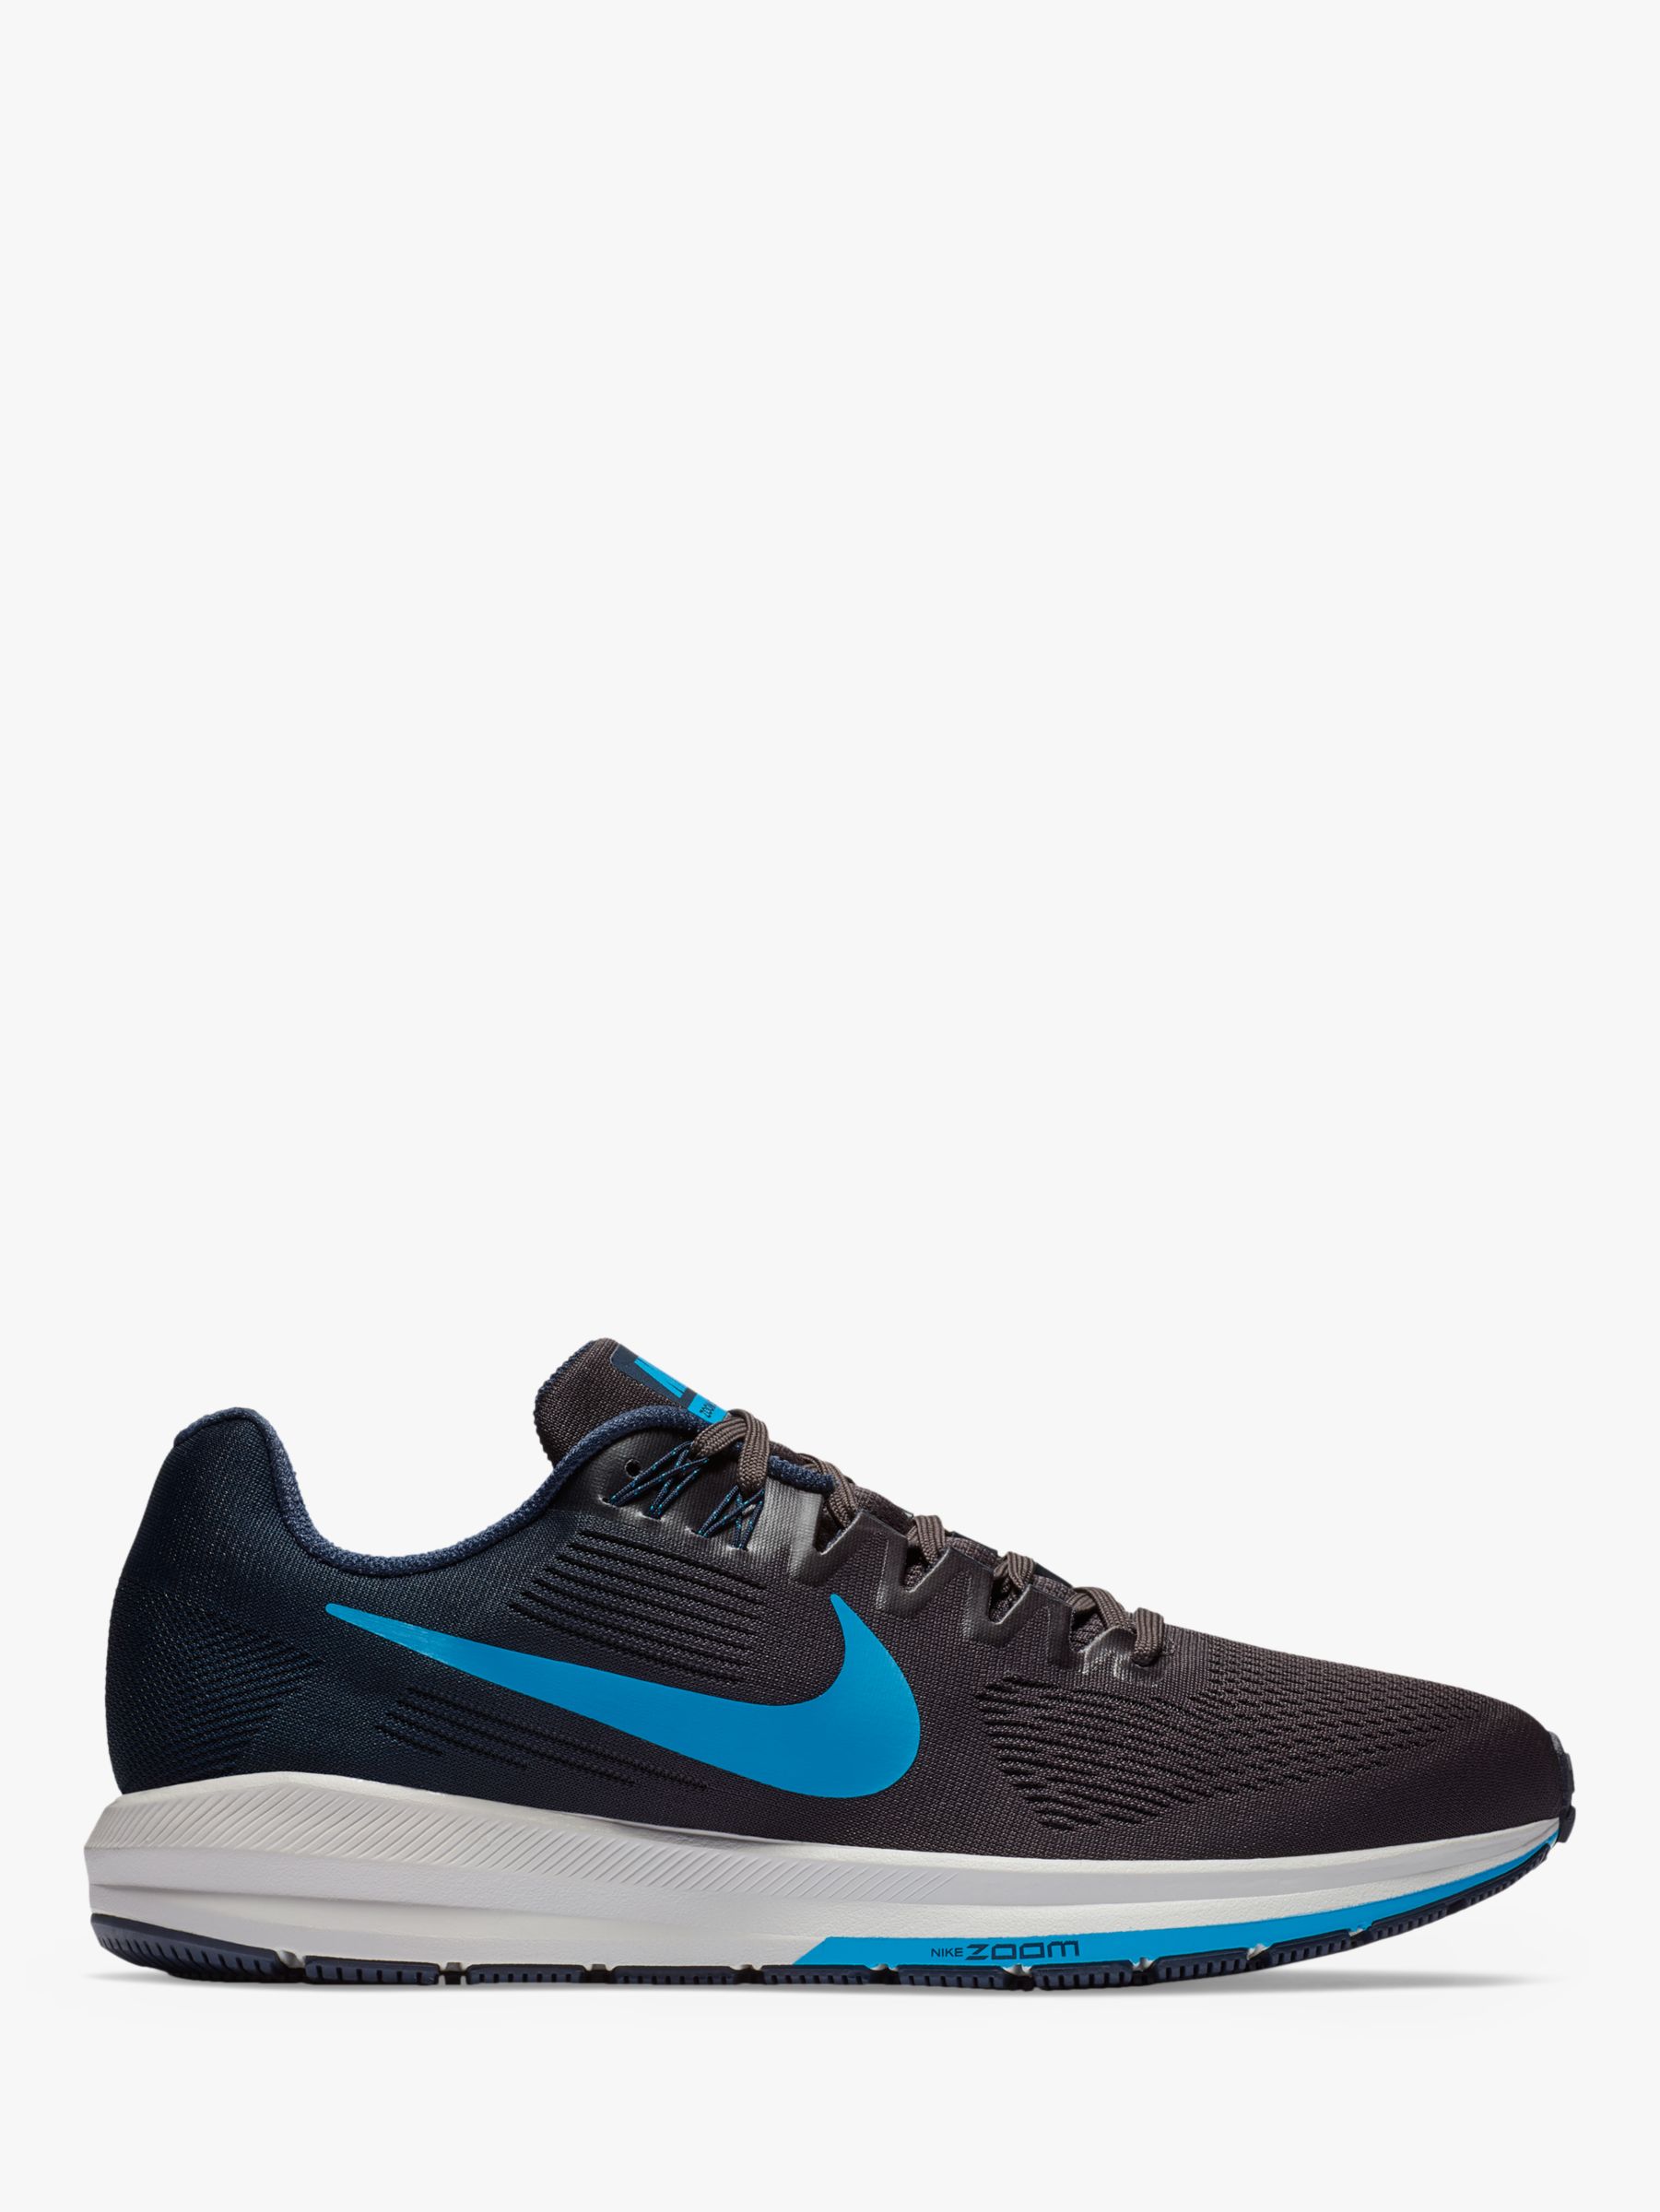 nike air zoom structure 21 men's